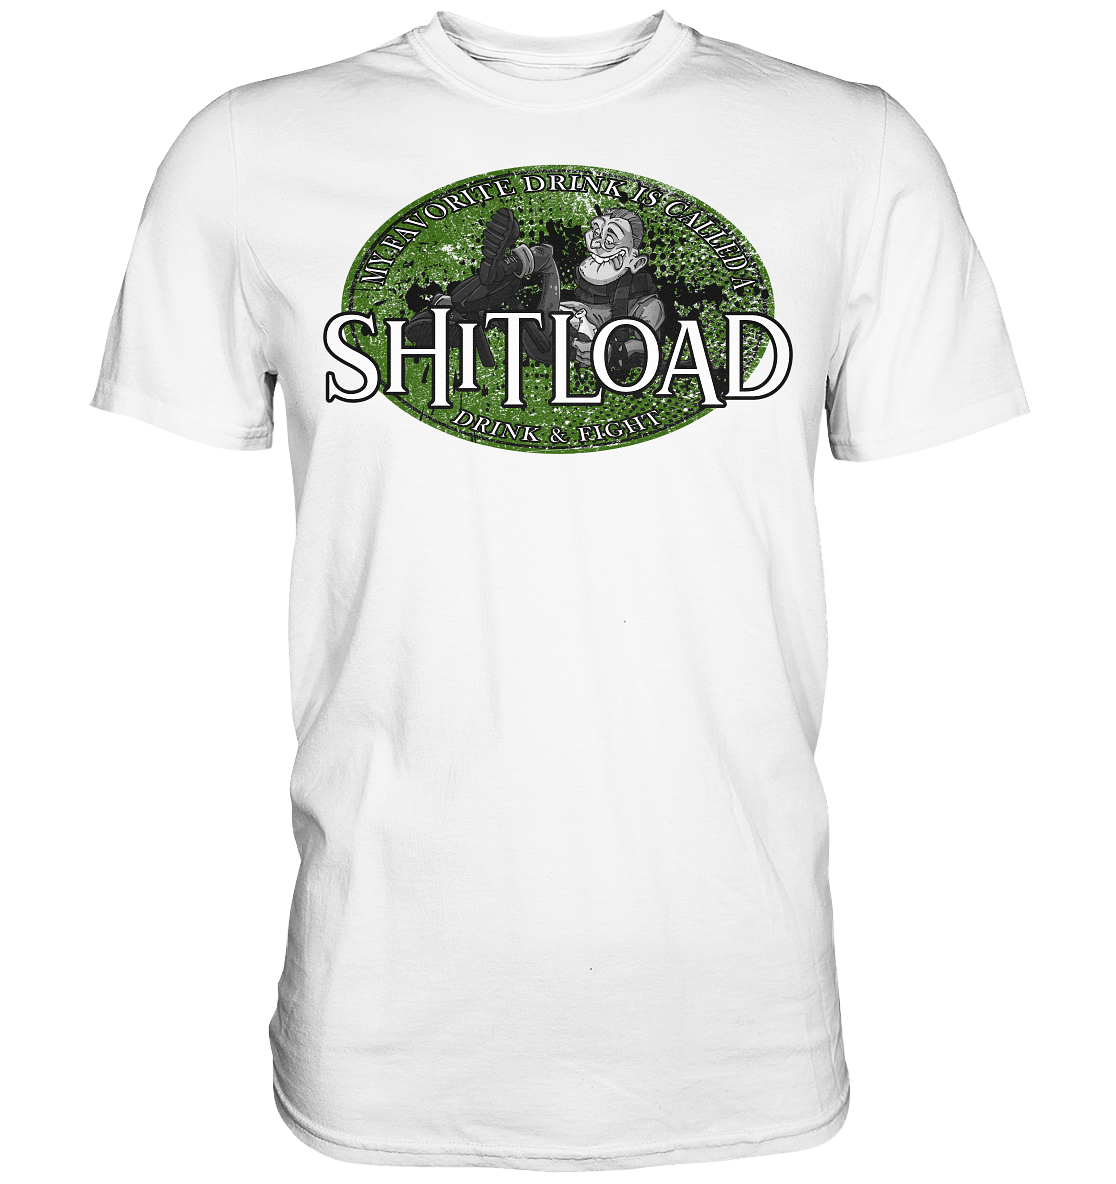 My Favorite Drink Is Called A "Shitload" - Premium Shirt